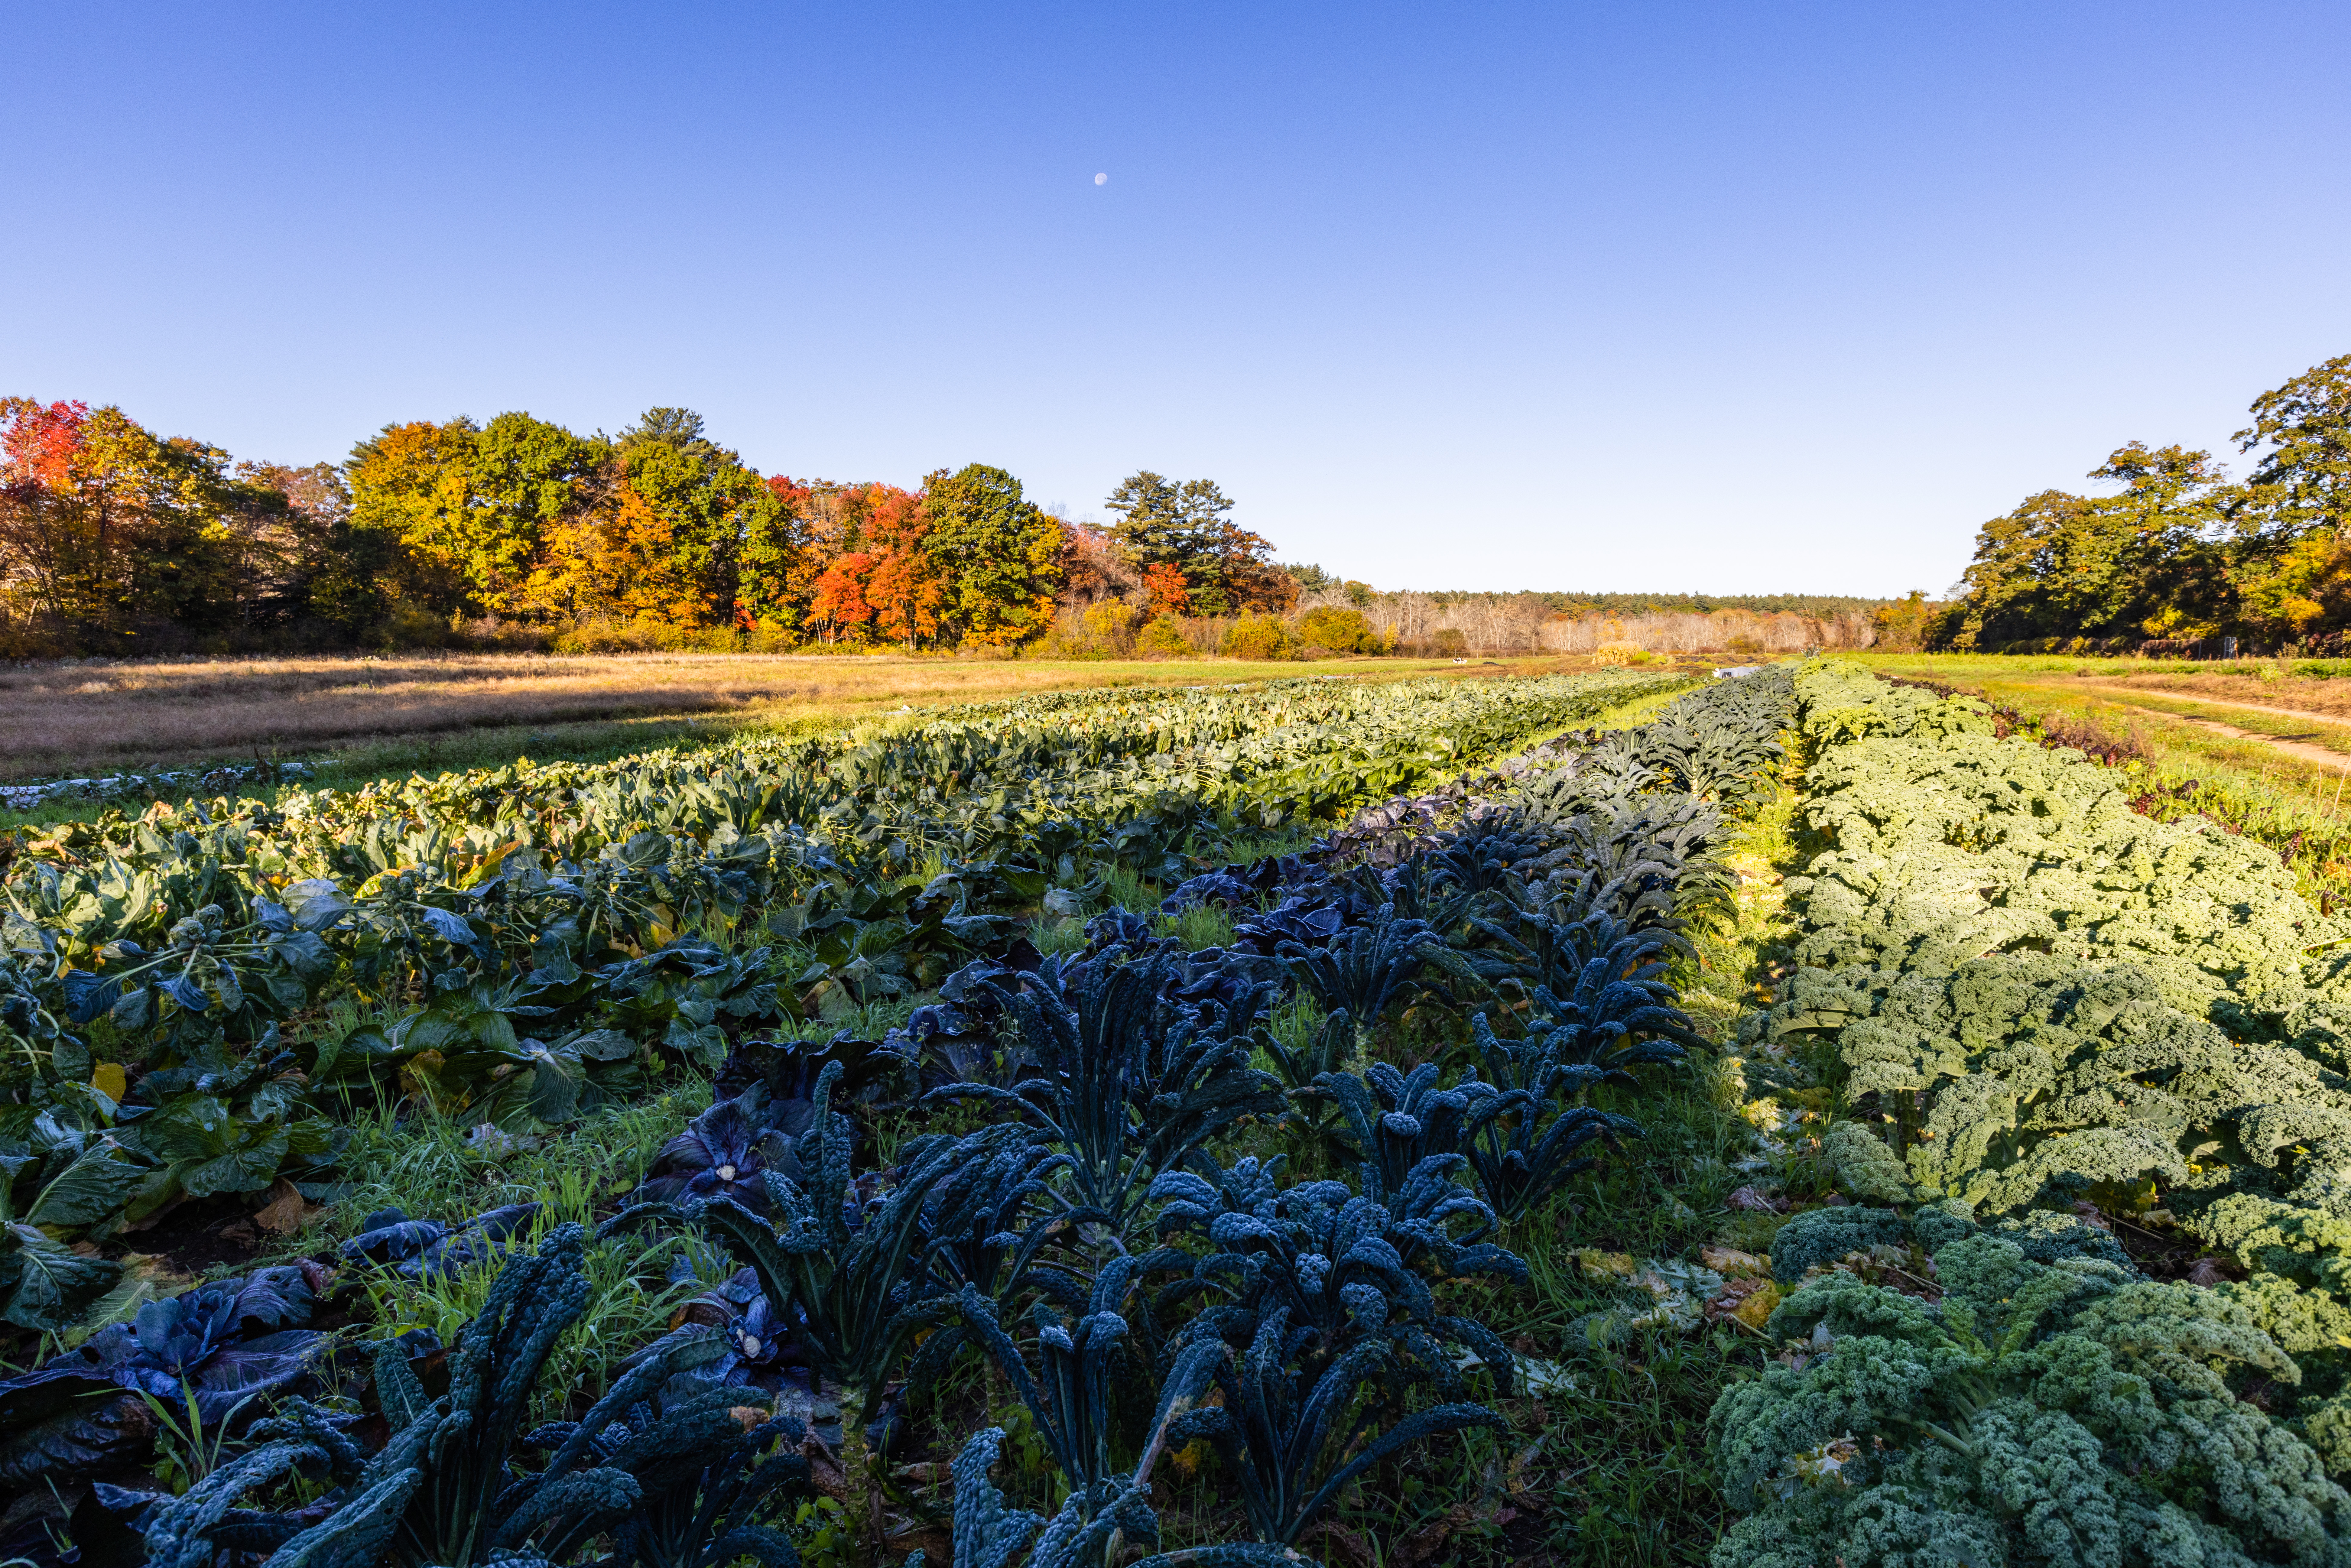 Kale and cabbage growing on Iron Ox Farm in Hamilton and Topsfield, Massachusetts.